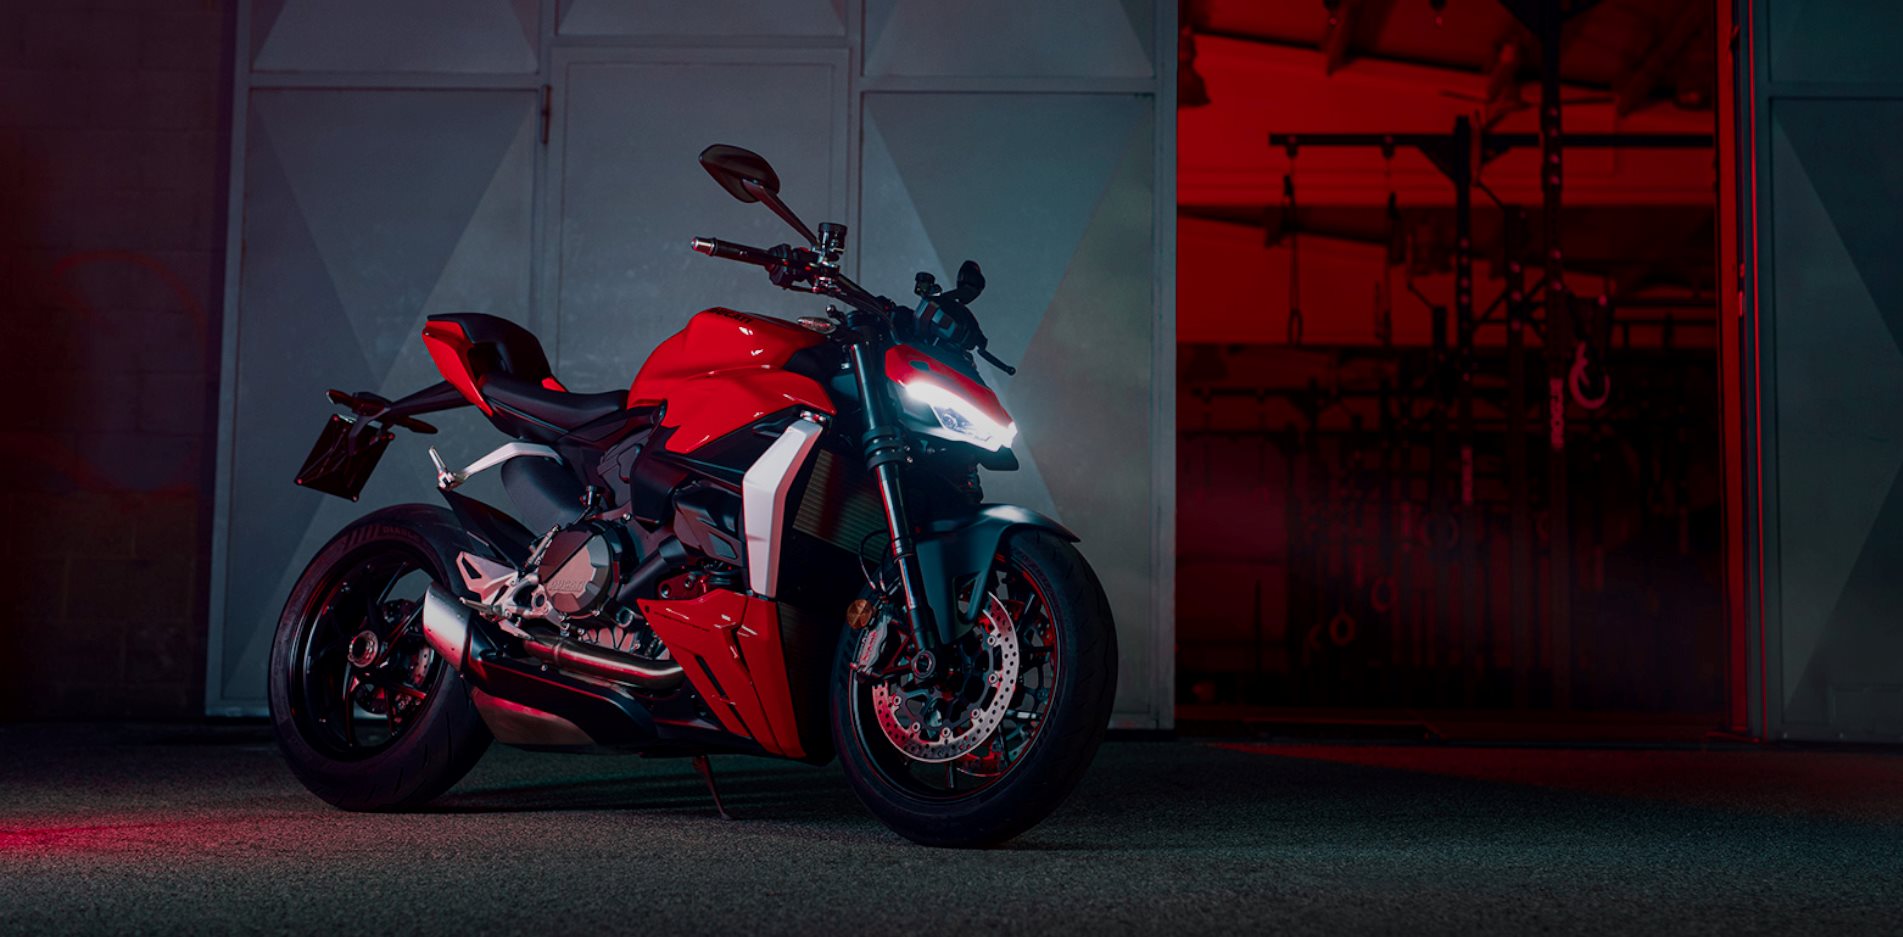 The reinterpretation of Ducati’s successful “Fight Formula” applied to the Panigale V2.